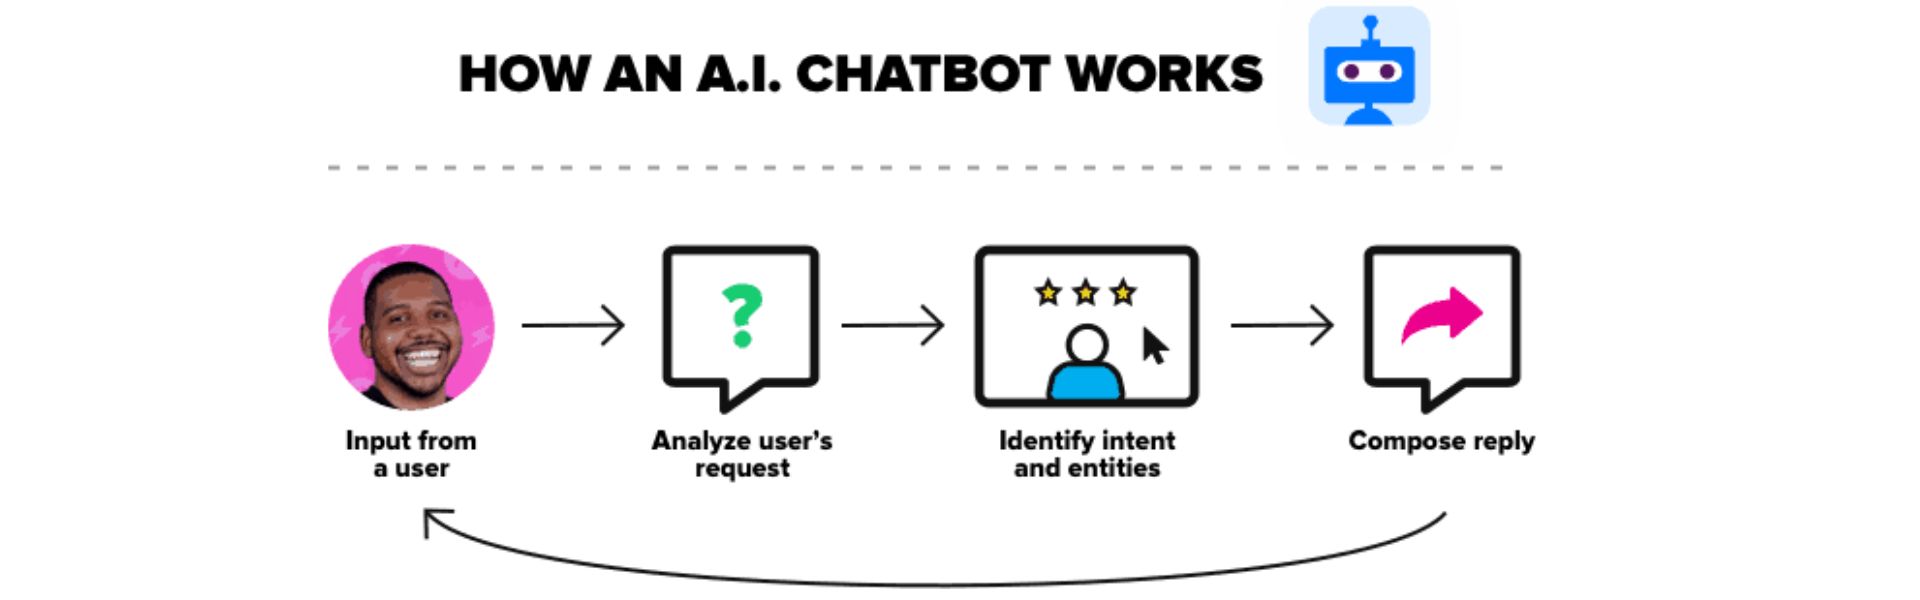 How does an AI Chatbot work